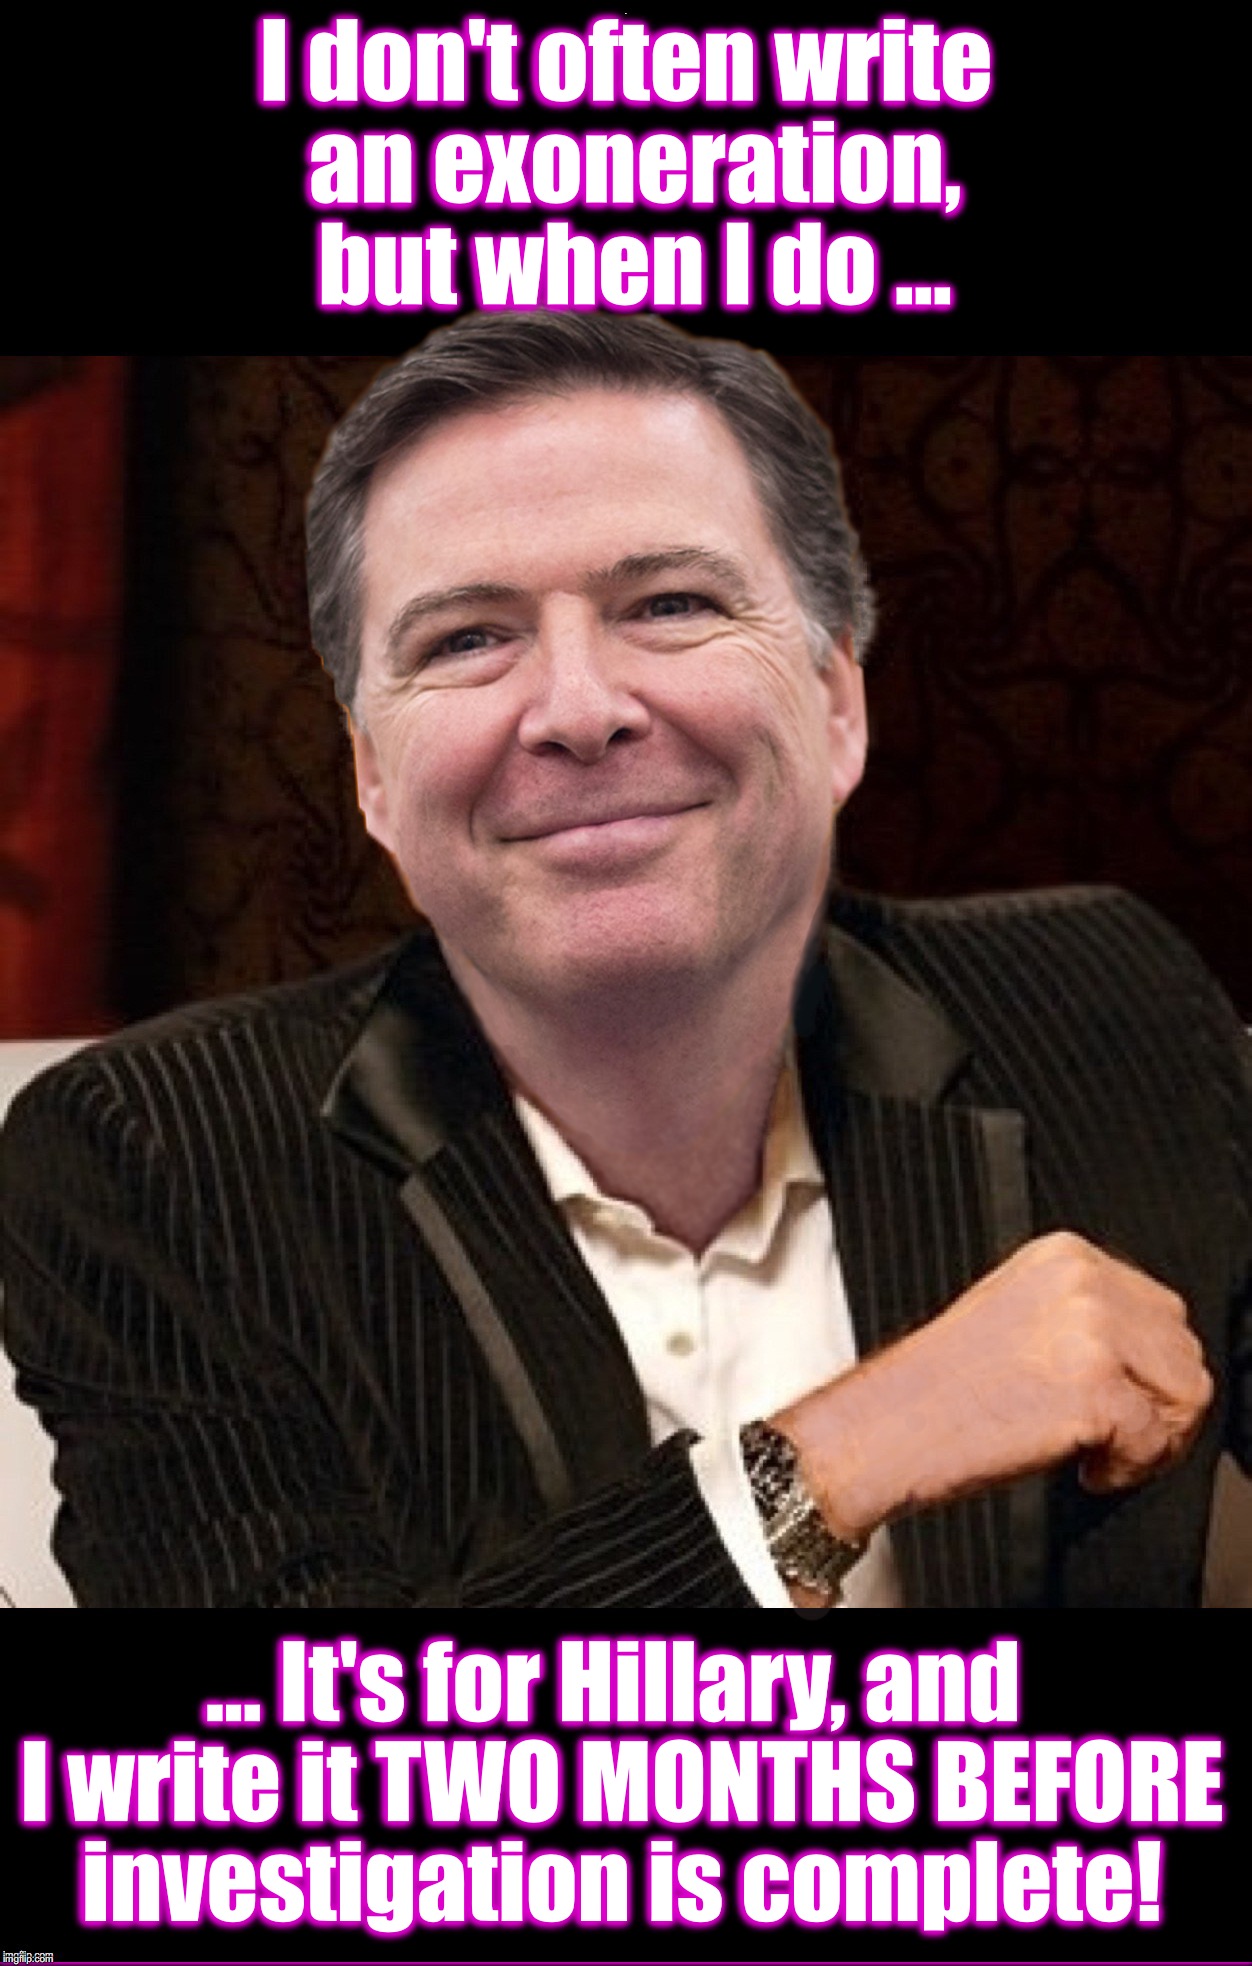 I don't often write an exoneration, but when I do ... ... It's for Hillary, and I write it TWO MONTHS BEFORE investigation is complete! | image tagged in james comey,hillary clinton,deep state | made w/ Imgflip meme maker